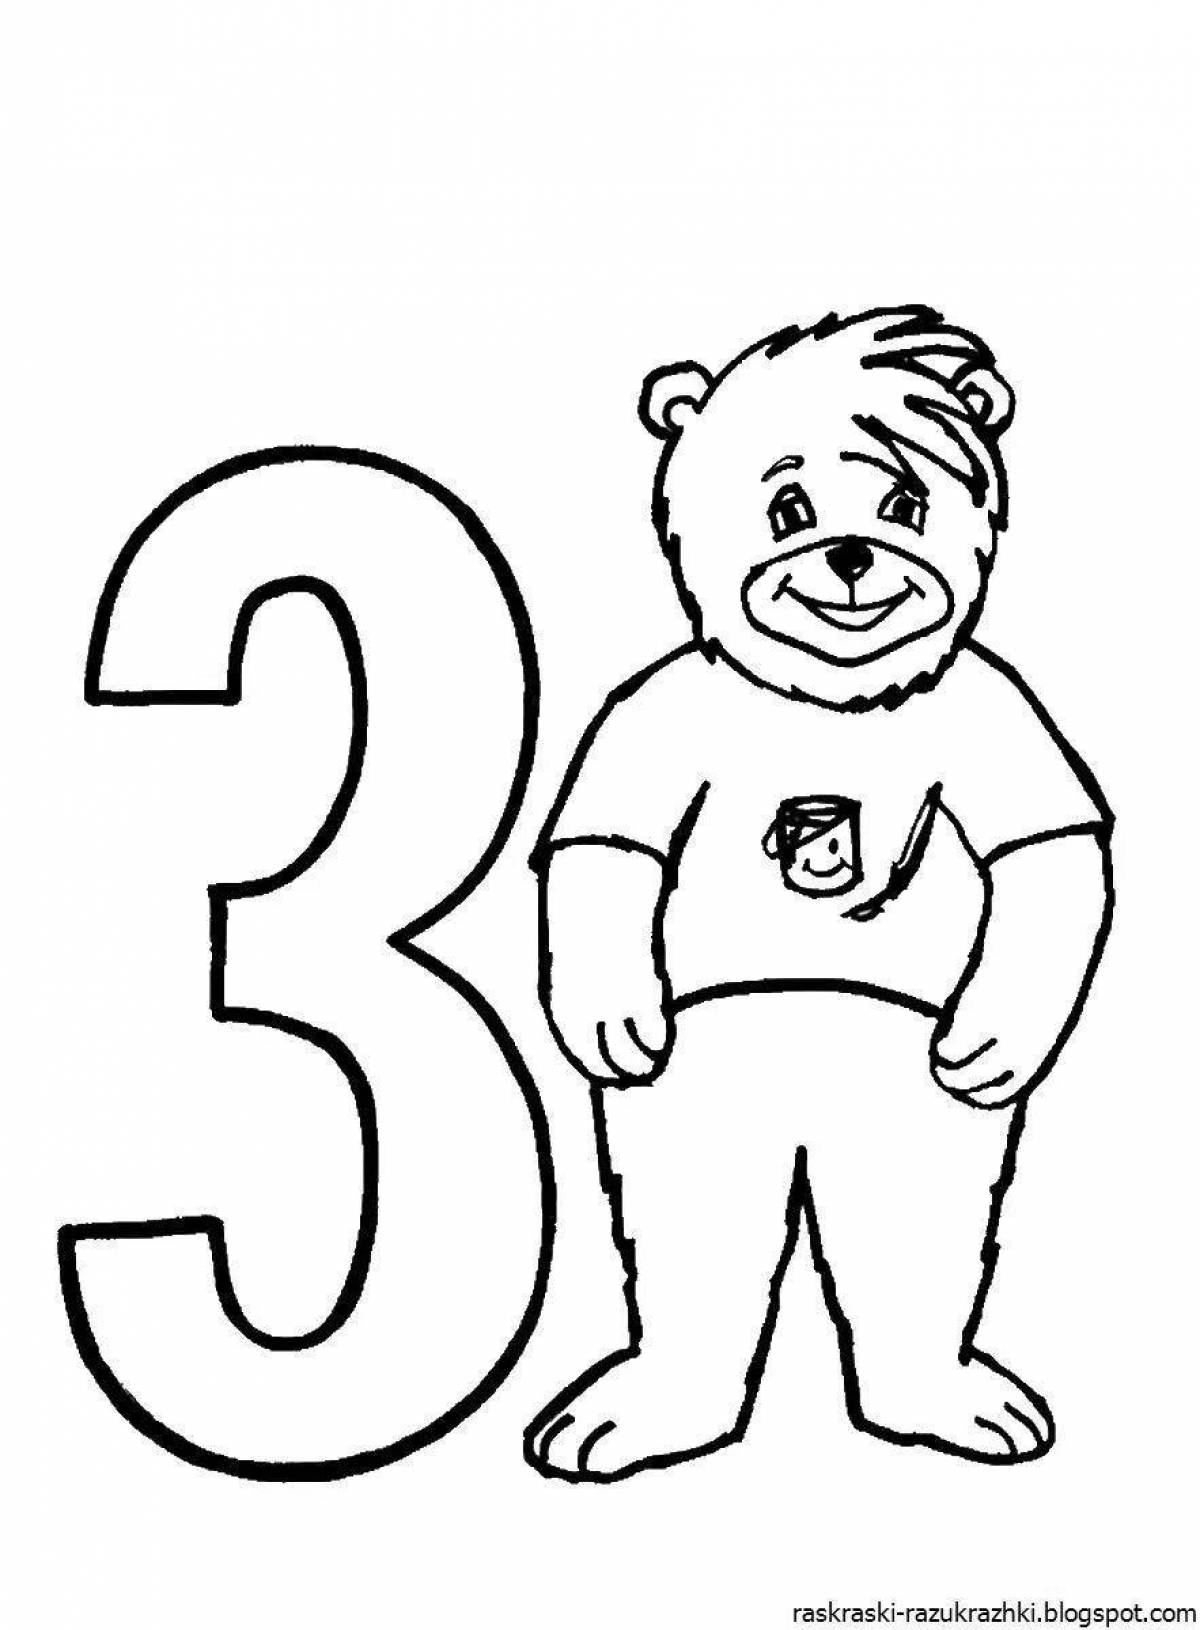 Playful coloring number 3 for kids